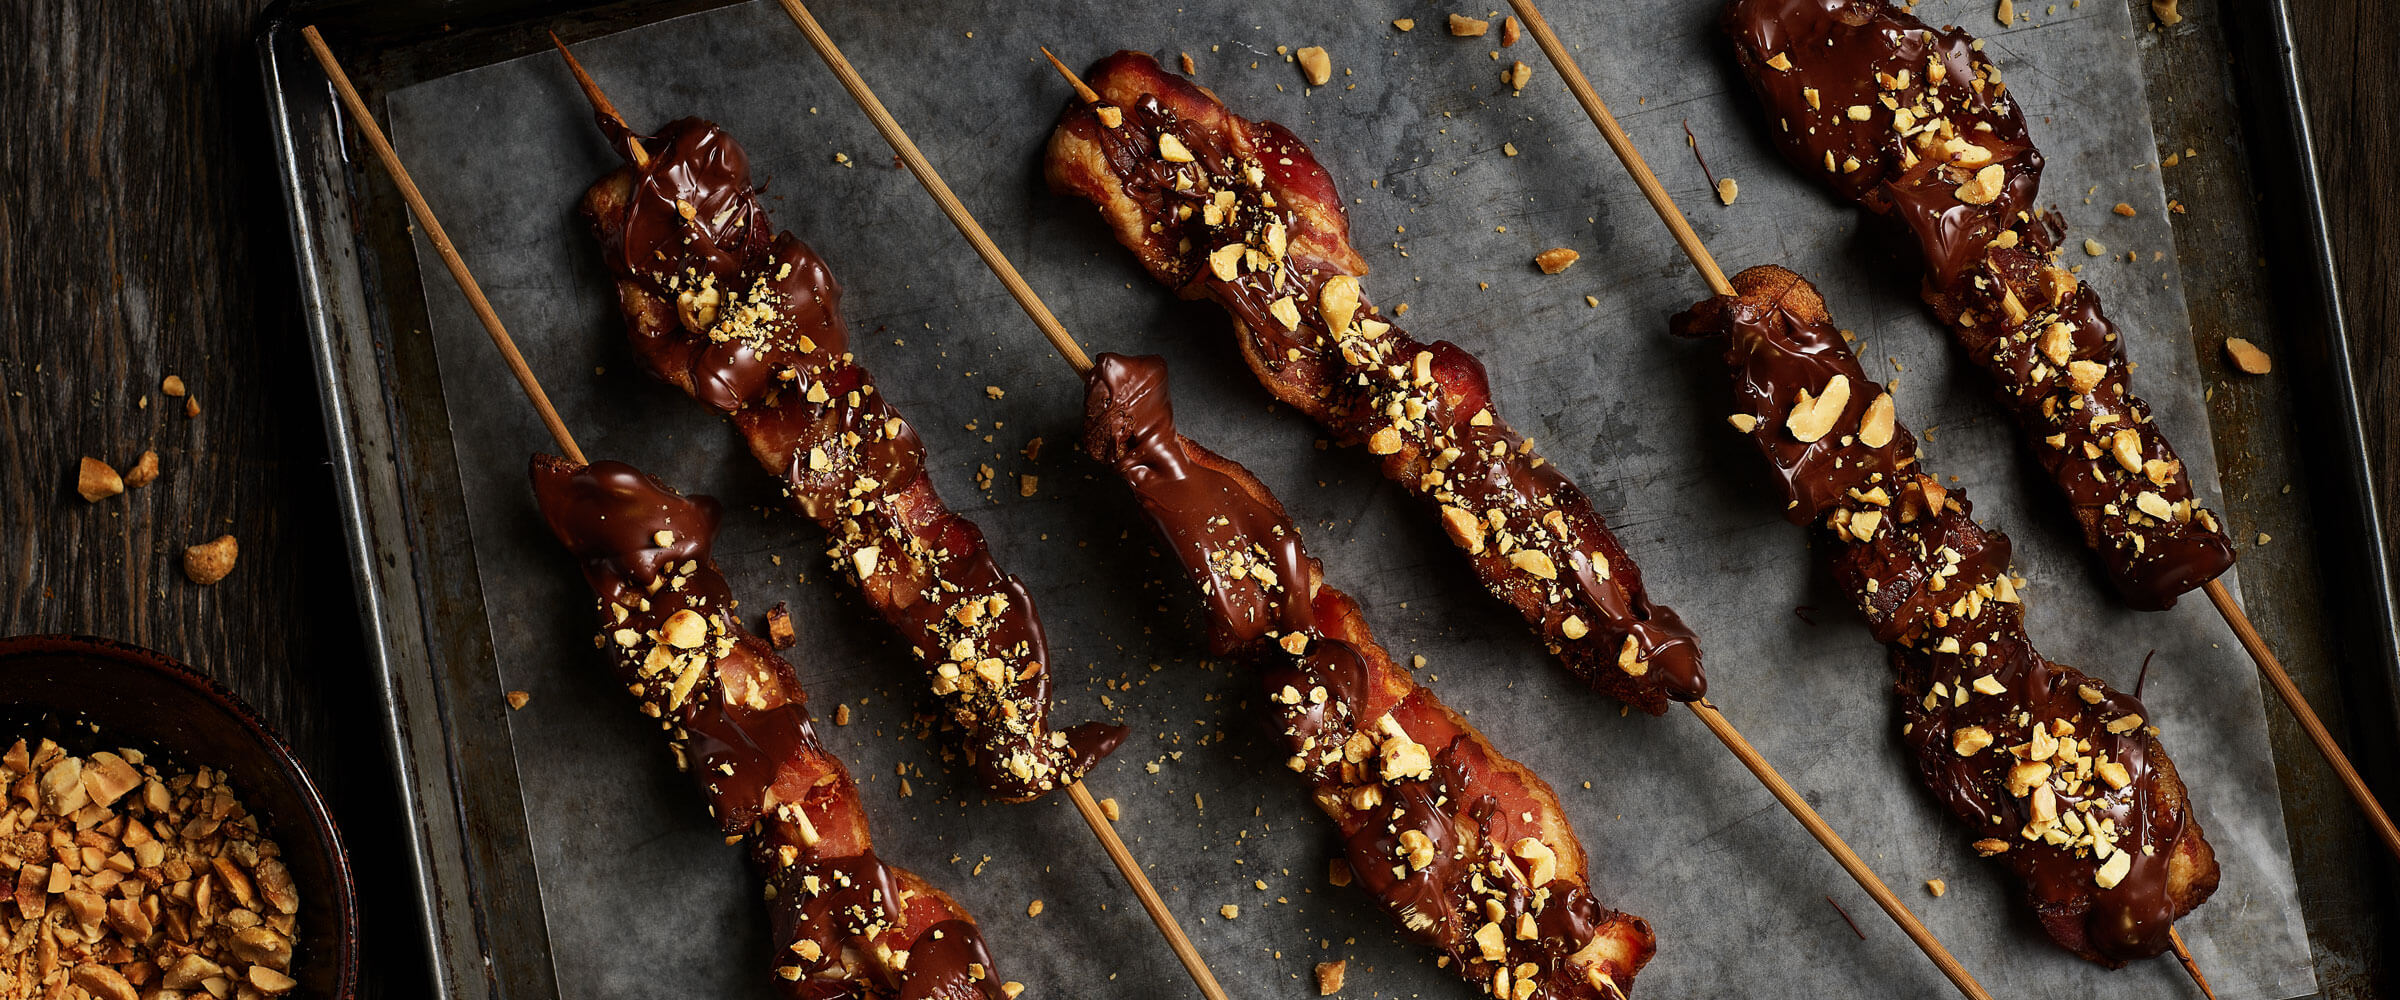 Chocolate-Covered Bacon on skewers topped with nuts on sheetpan